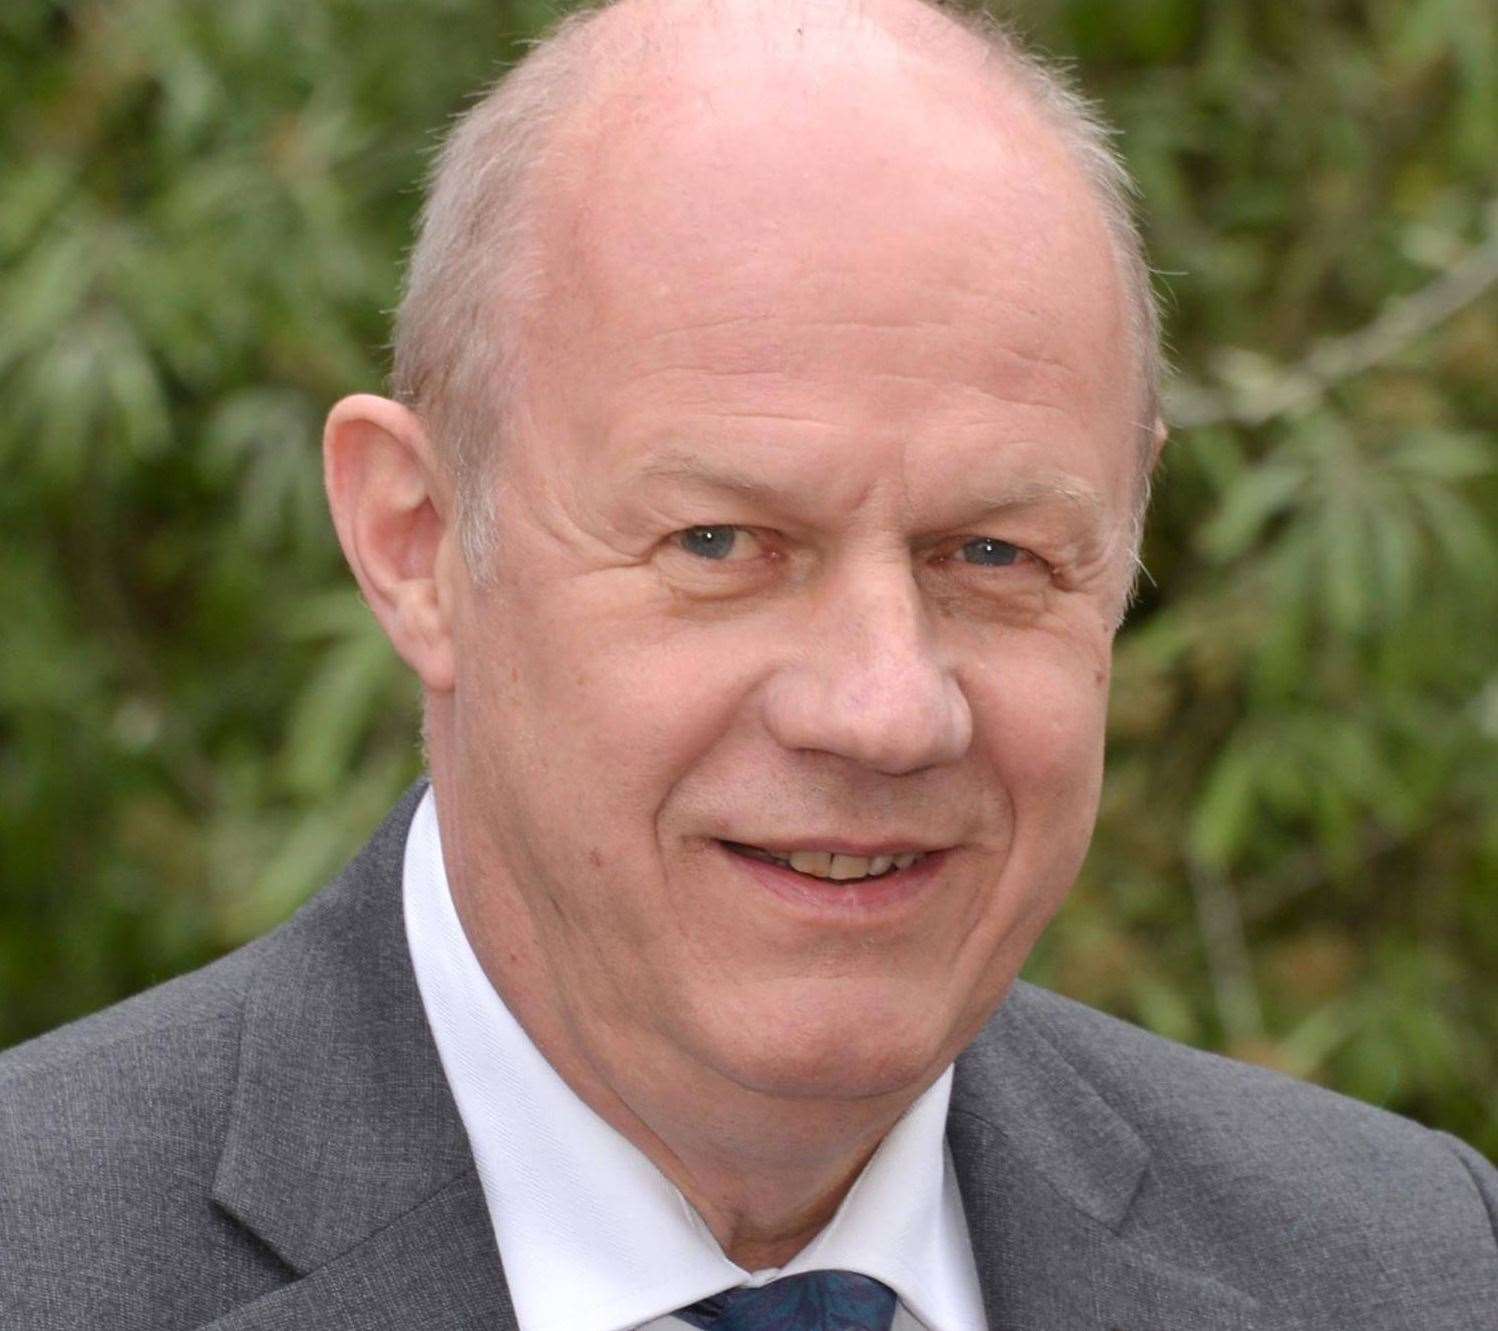 Ashford MP Damian Green has been contacted by concerned constituents